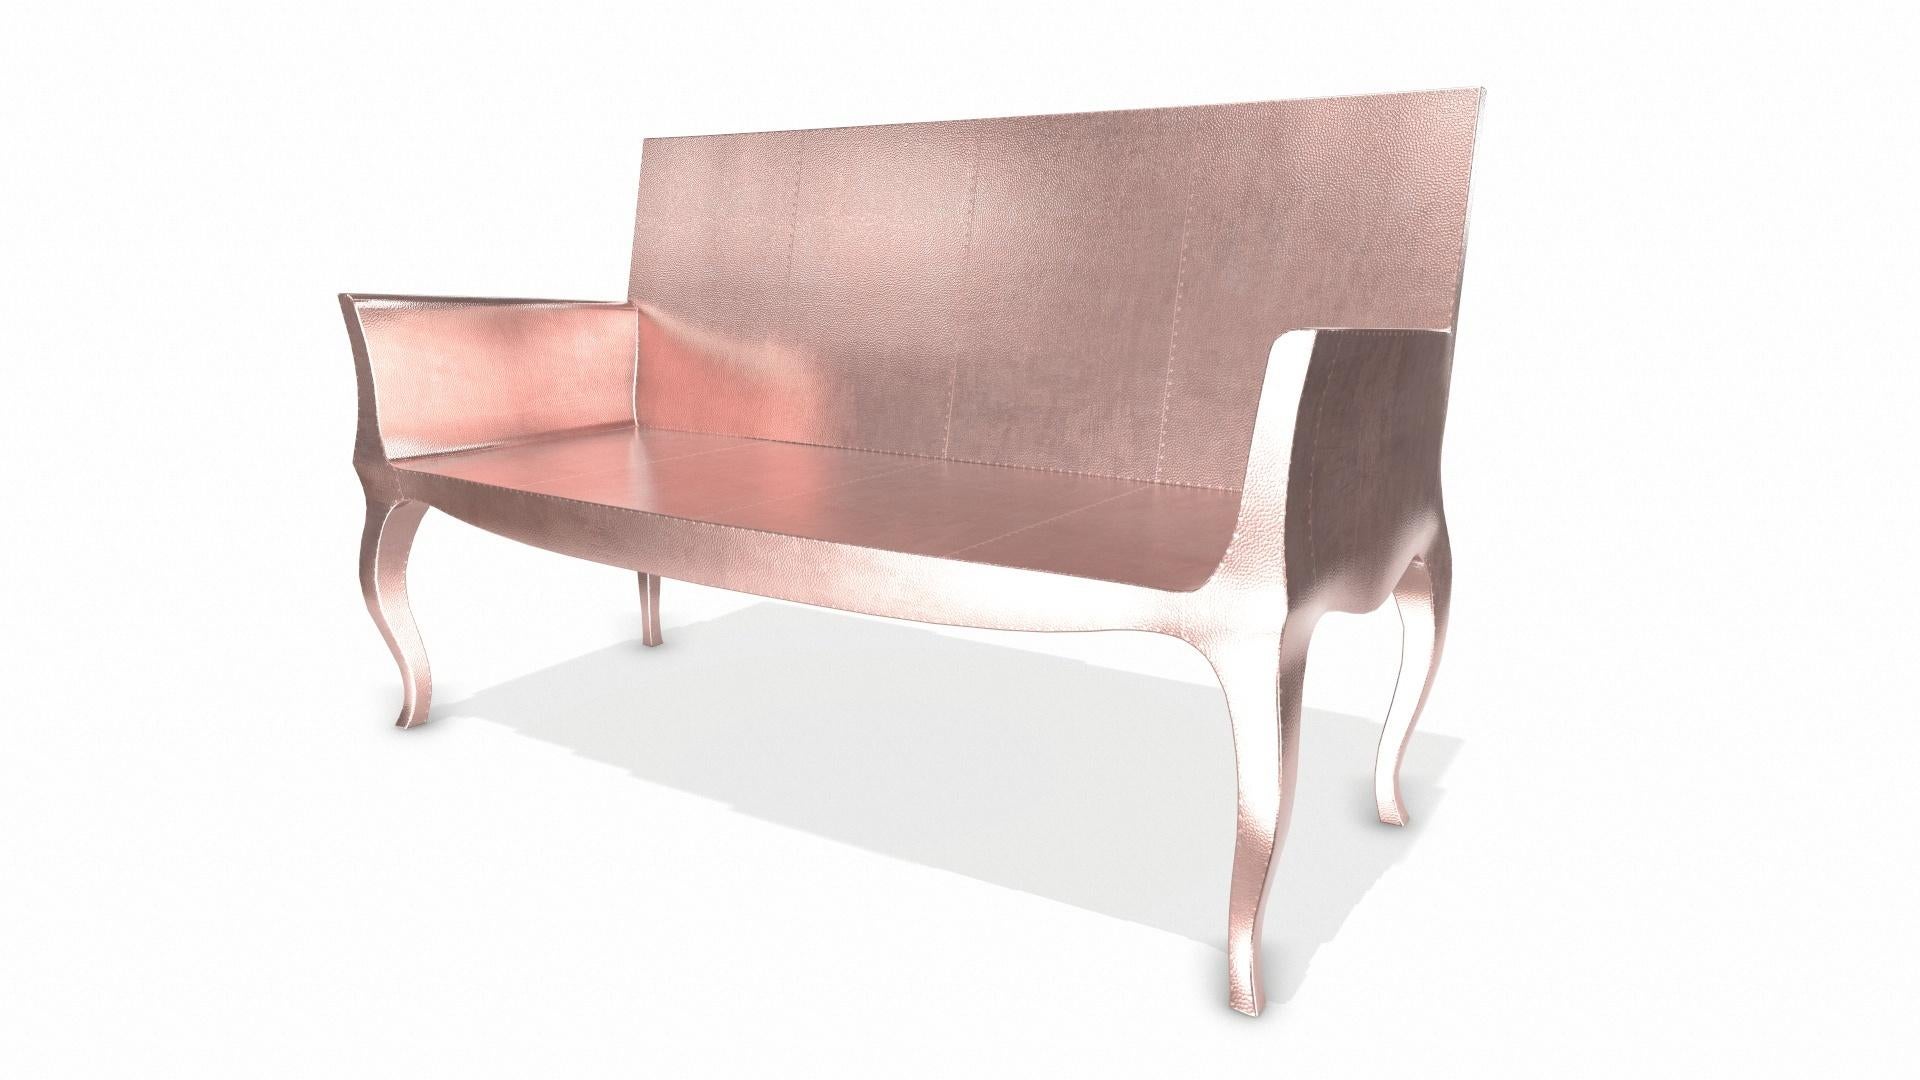 American Louise Settee Art Deco Loveseats in Mid. Hammered Copper by Paul Mathieu For Sale